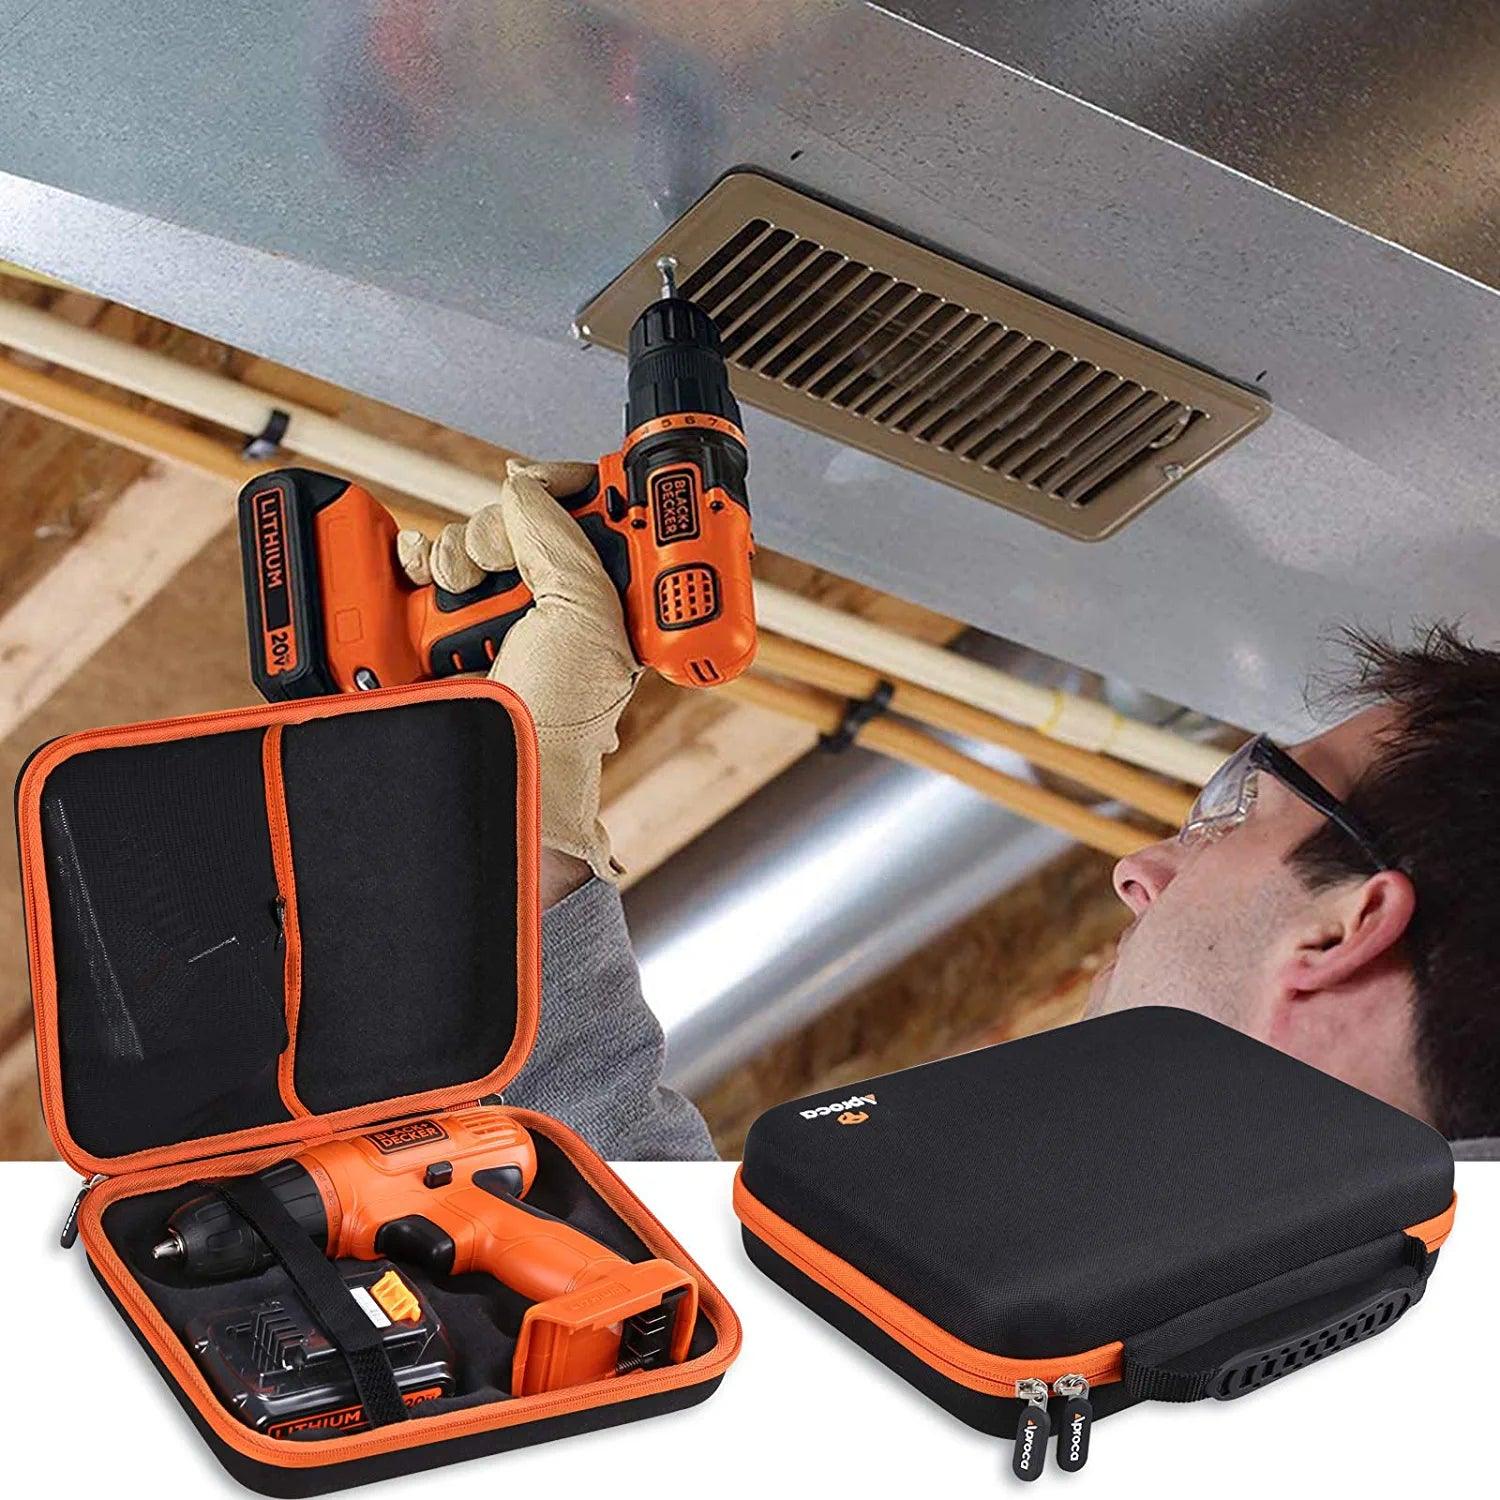 Hard Travel Storage Carrying Protective Case for BLACK+DECKER LDX120C 20V MAX Cordless Drill/Driver